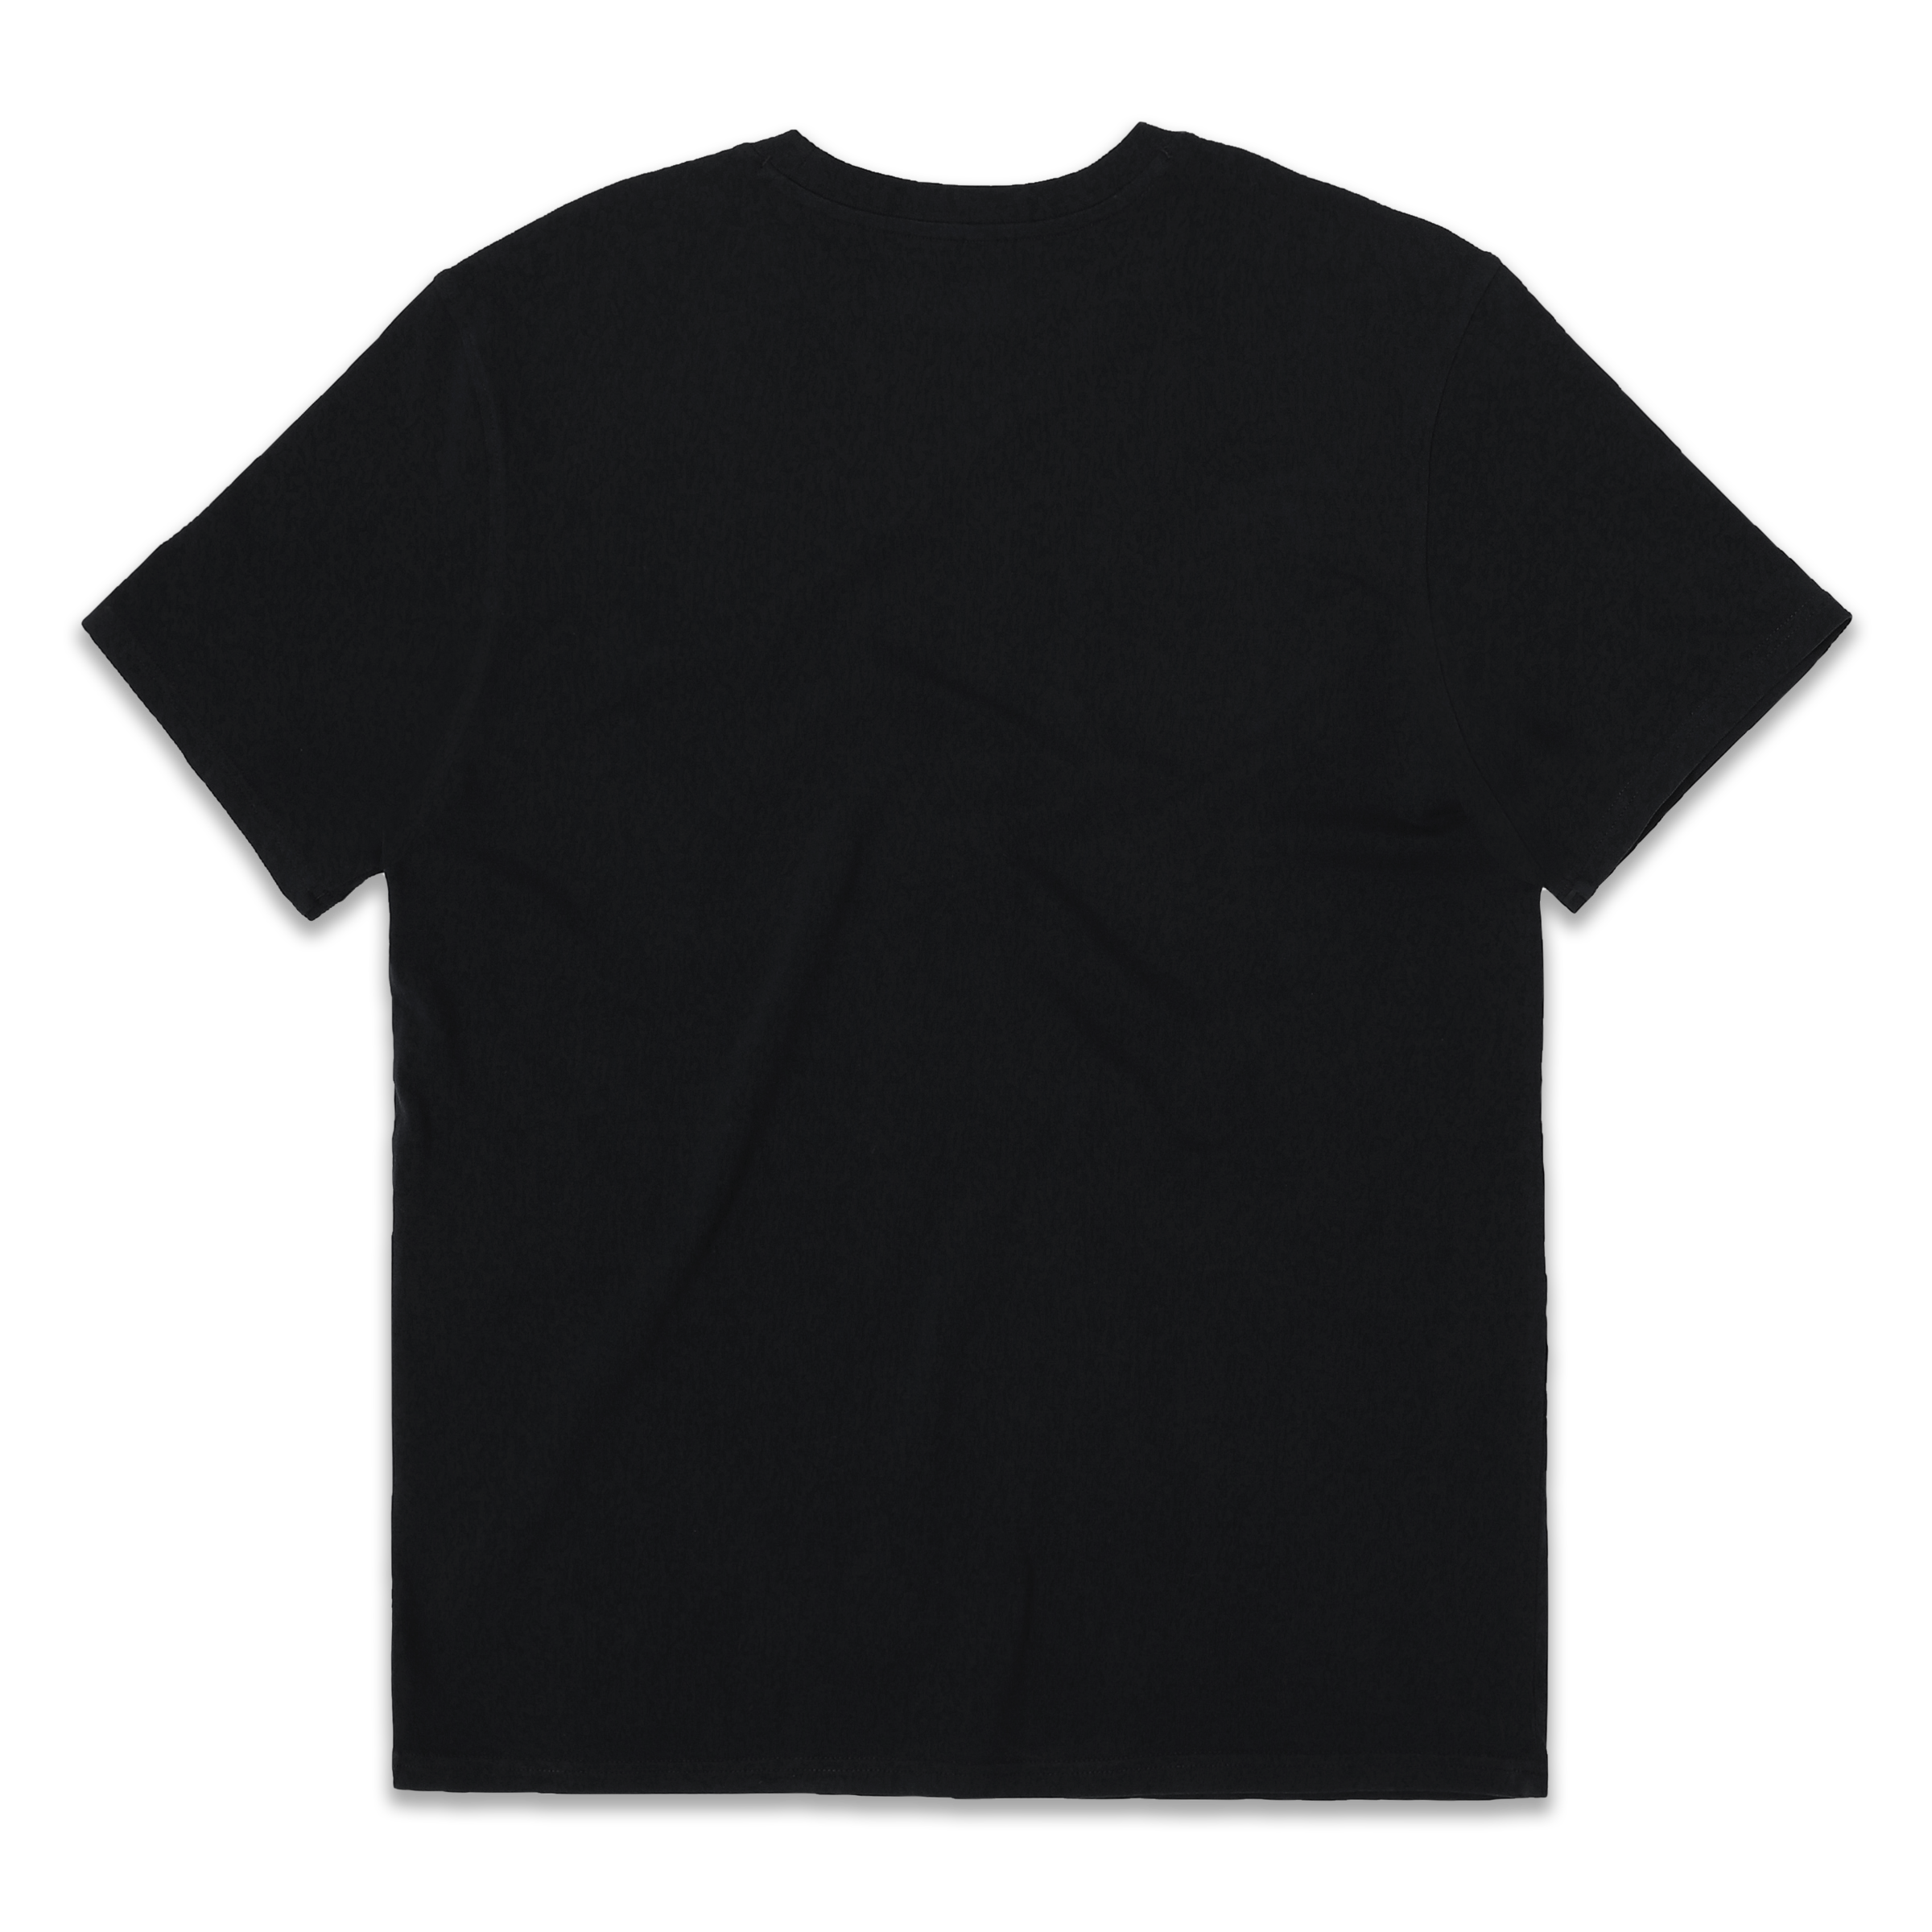 Natural Dye Tee Black back with crewneck and short sleeves